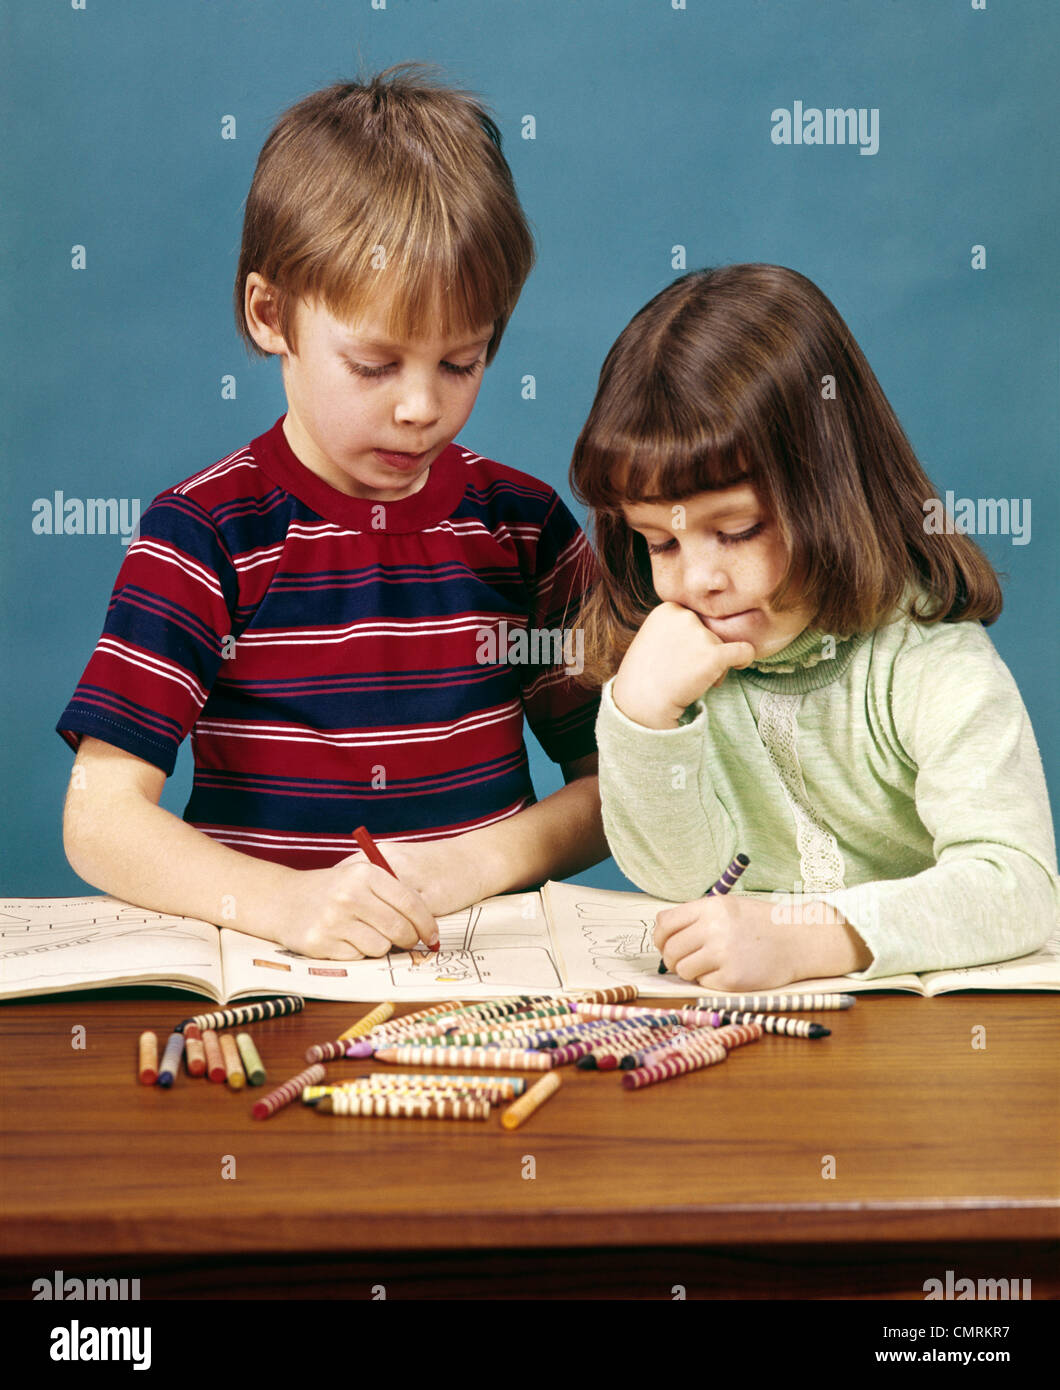 1970 1970s RETRO BOY GIRL BROTHER SISTER COLORING DRAWING IN COLORING BOOKS WITH CRAYONS Stock Photo